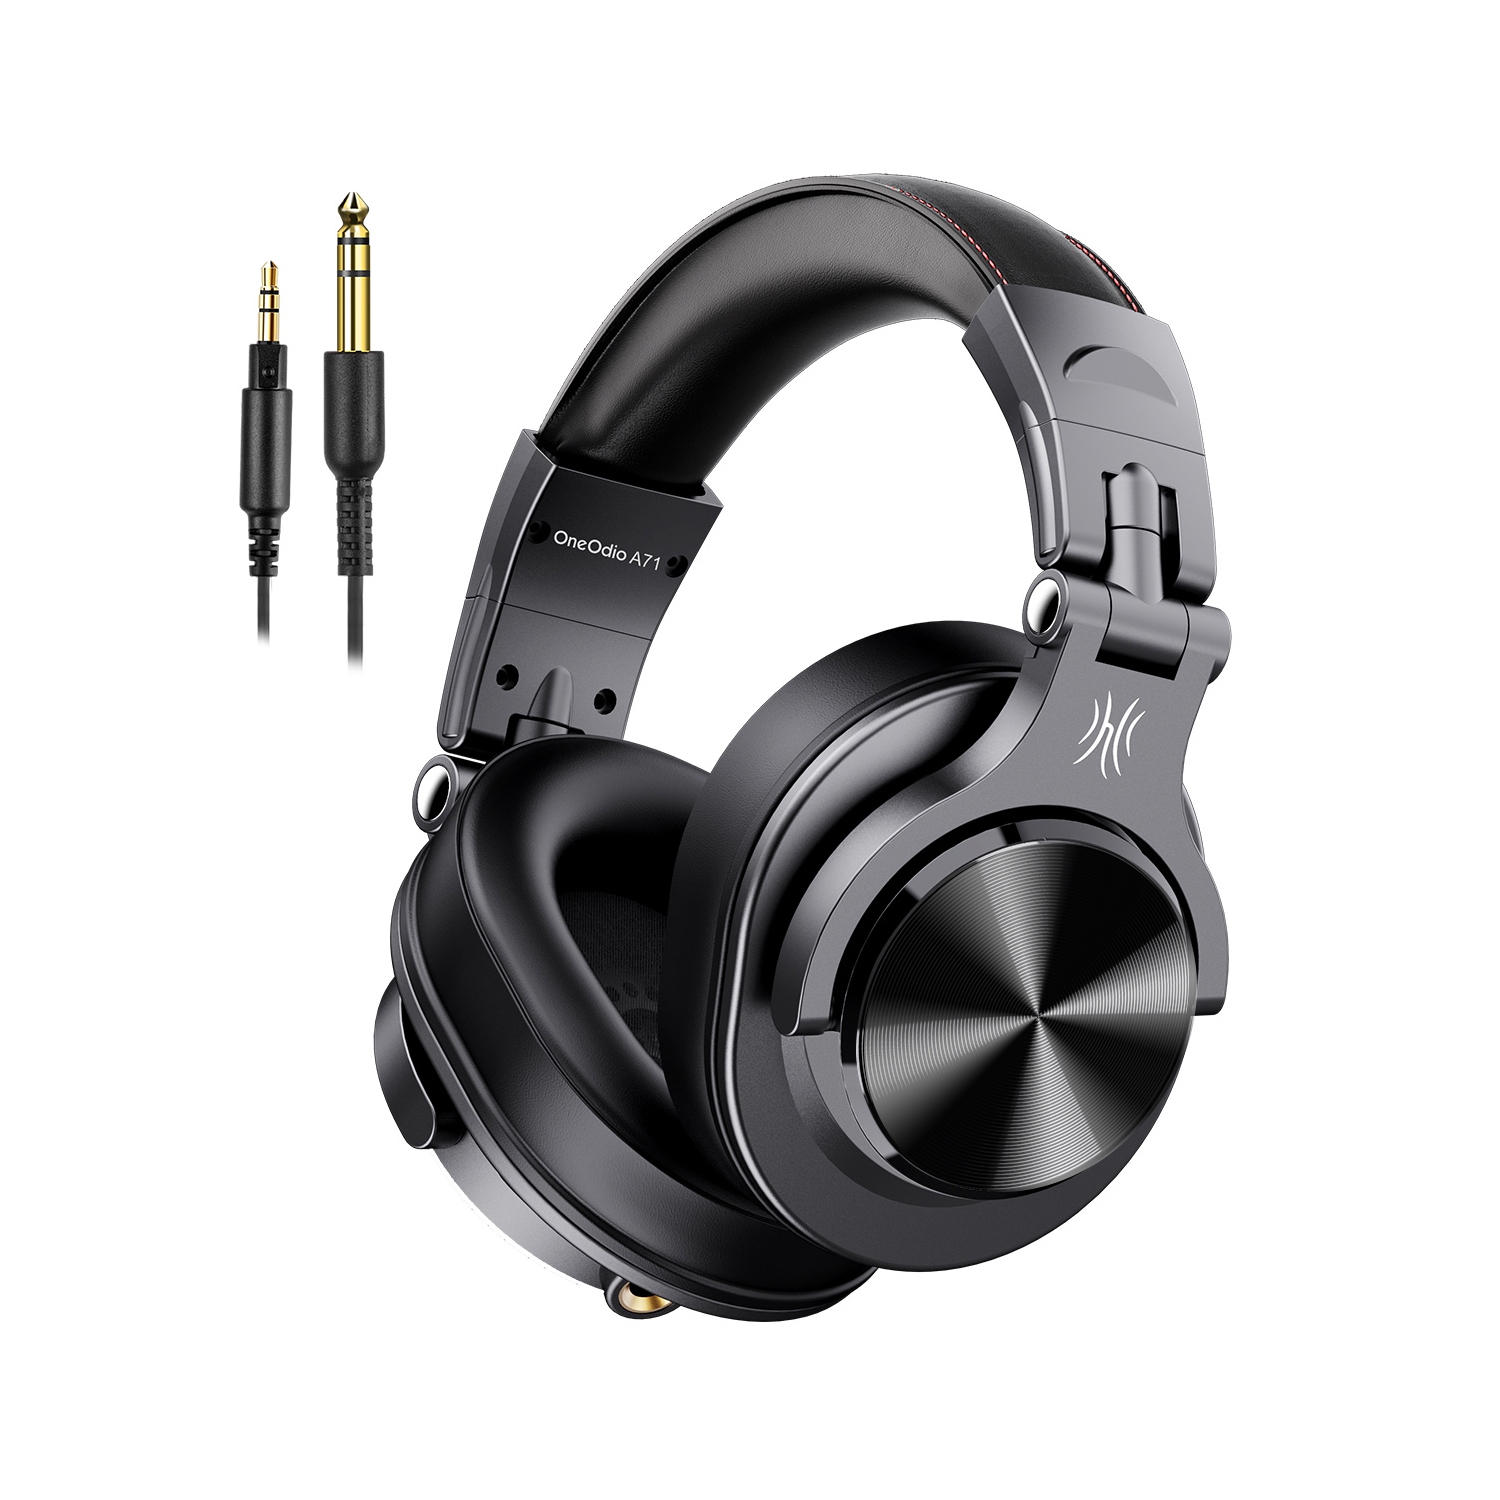 OneOdio Over-Ear Wired Headphones Corded Headphones with Dual Plugs Hi-res Stereo Sound & Mic Long Cords-A71 Black